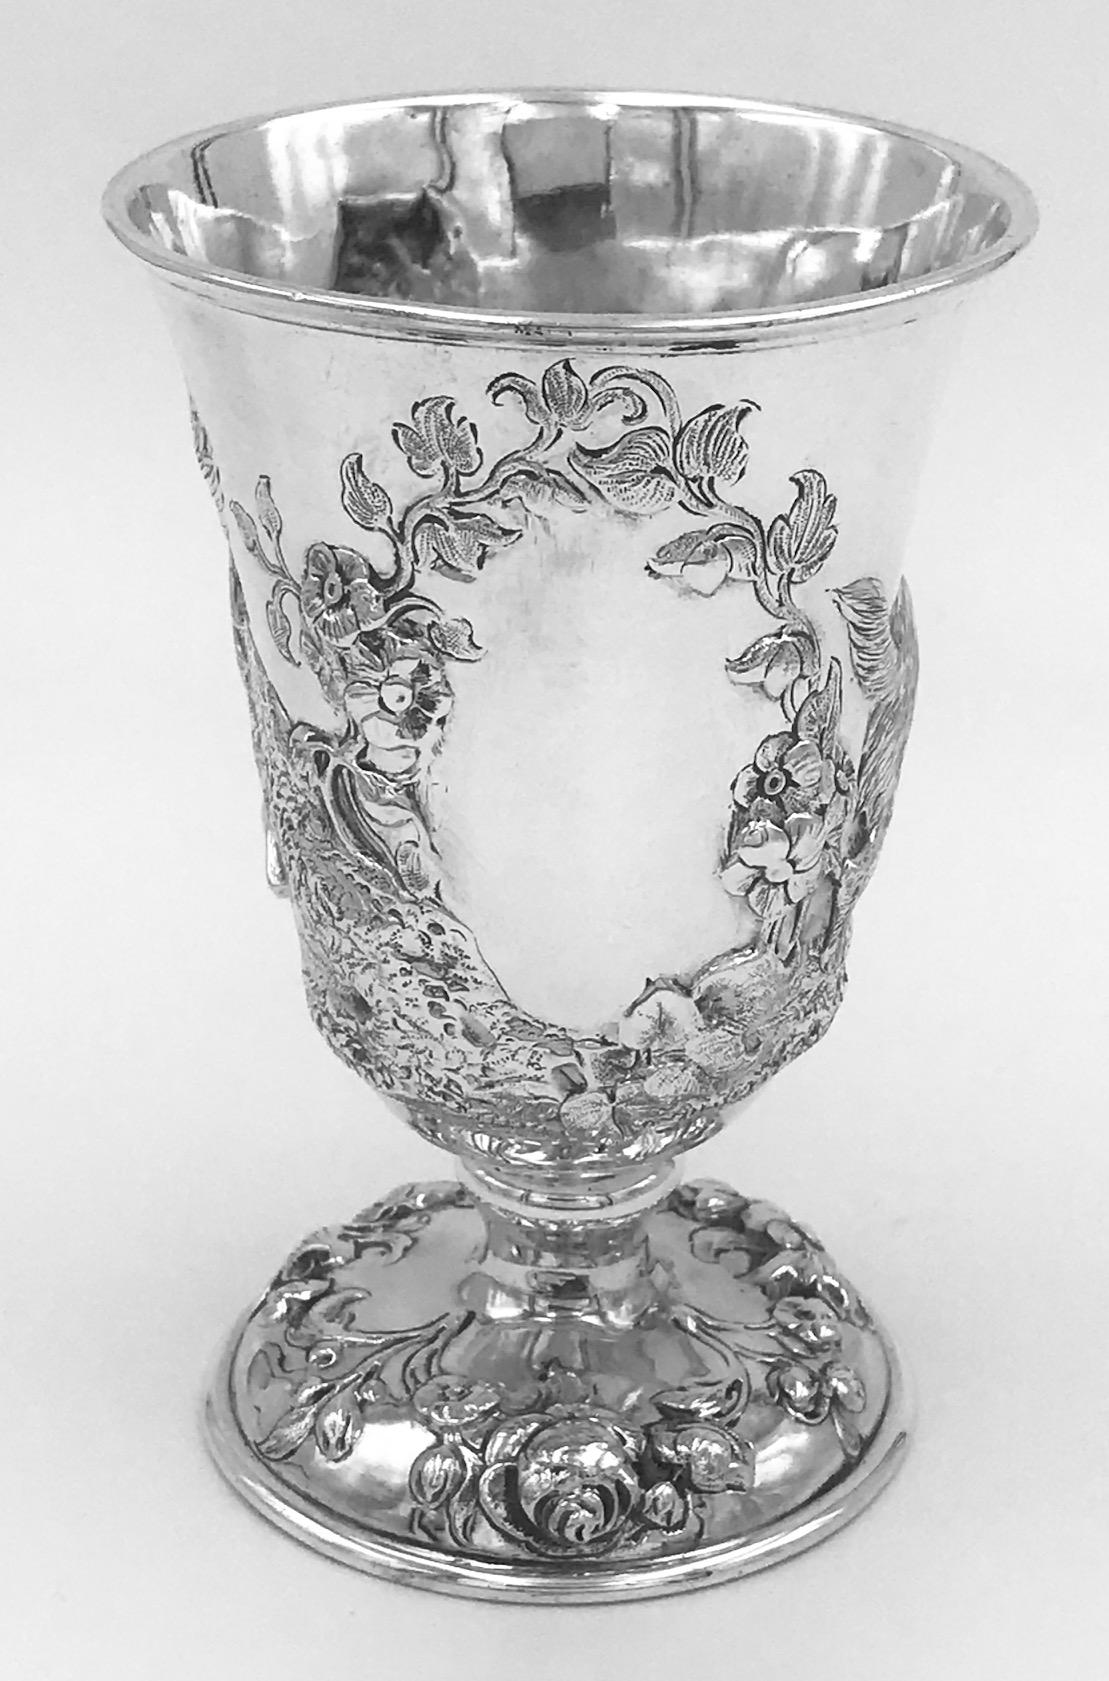 An antique Victorian silver goblet beautifully embossed with 3 dogs. It was made by Robert Hennell, and hallmarked in London in 1858.